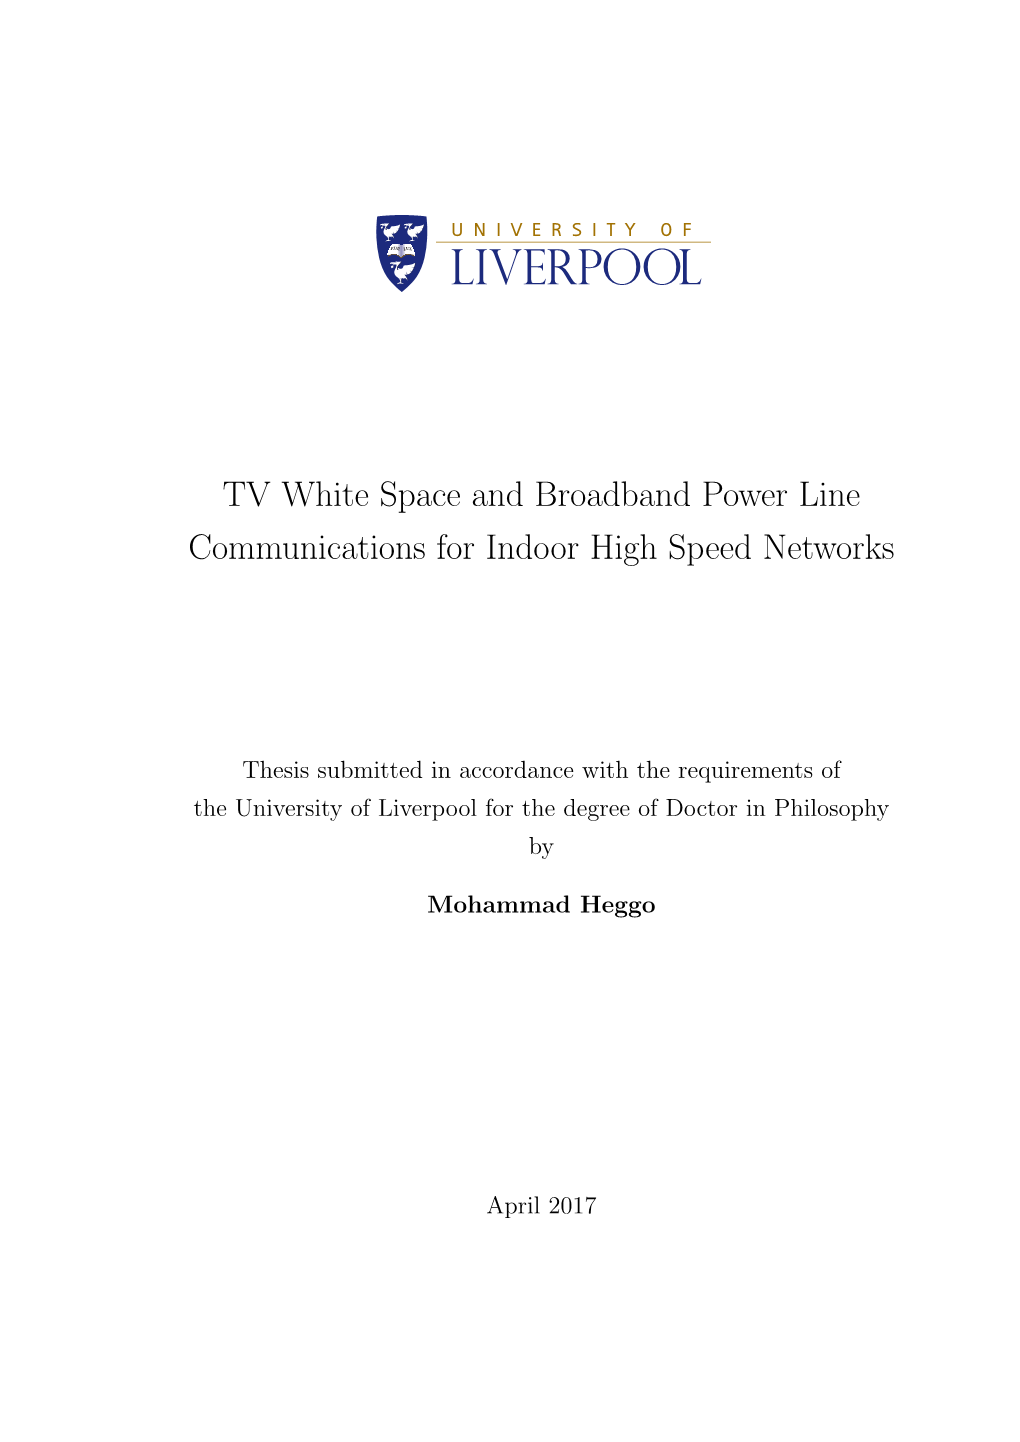 TV White Space and Broadband Power Line Communications for Indoor High Speed Networks